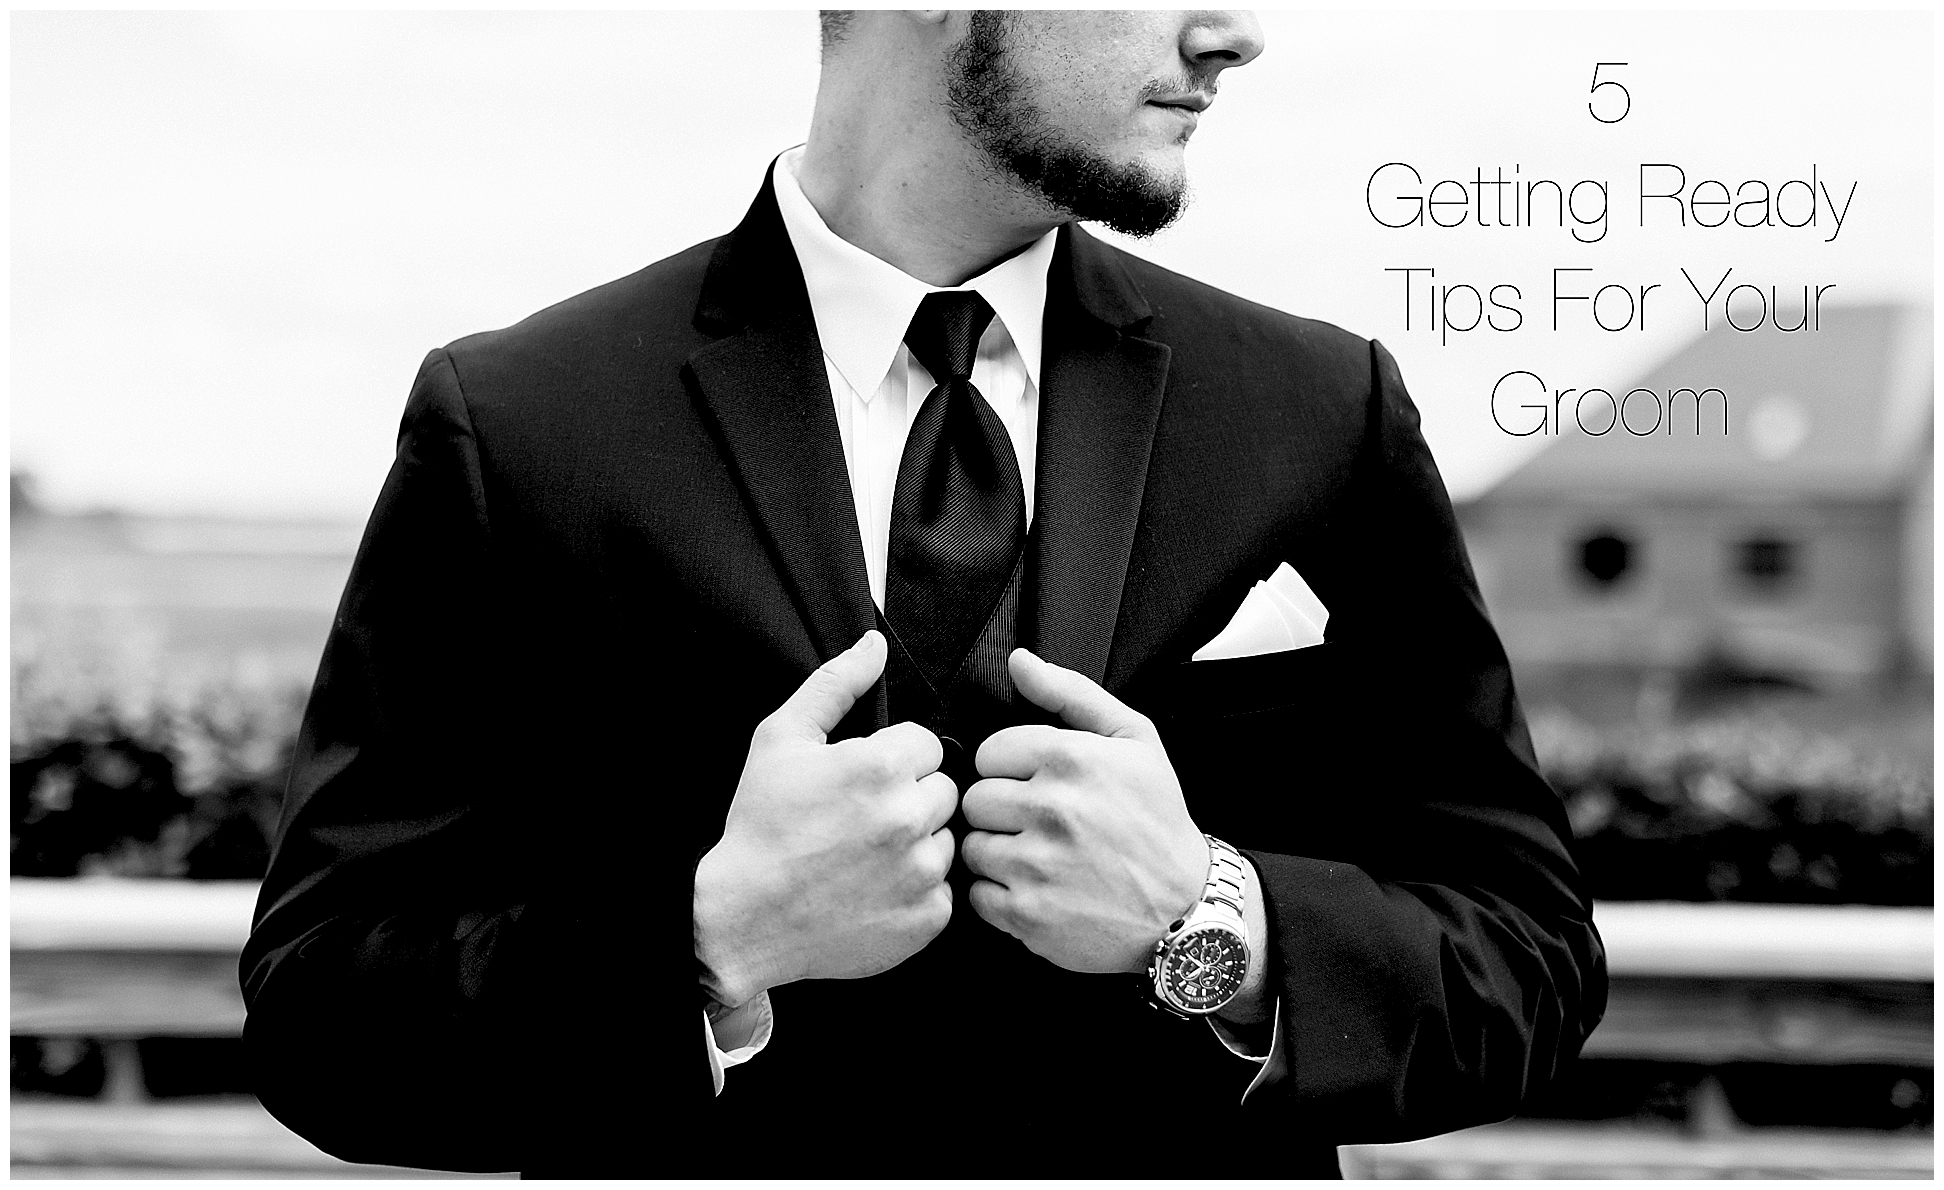 5 Getting Ready Tips For Your Groom